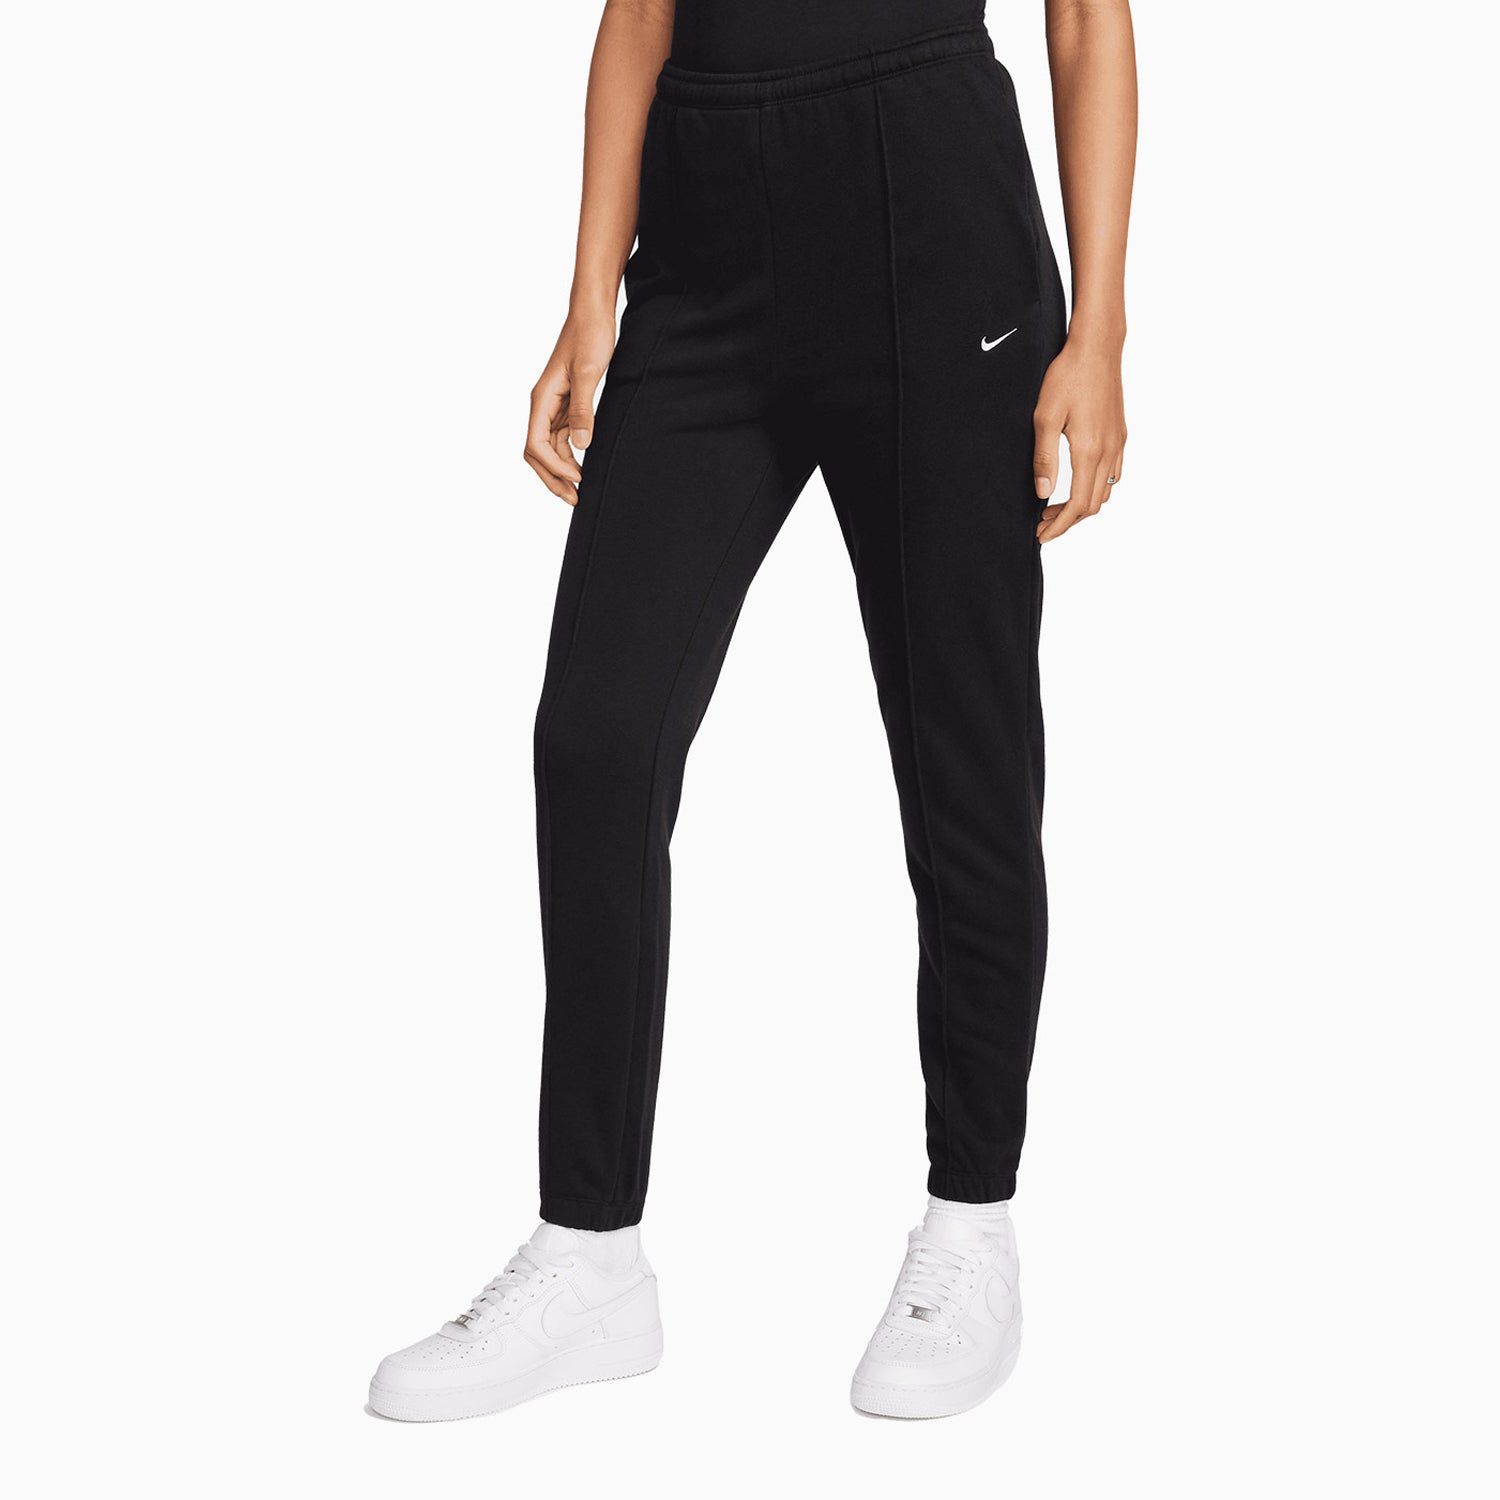 nike-womens-sportswear-chill-terry-outfit-fn2415-010-fn2434-010